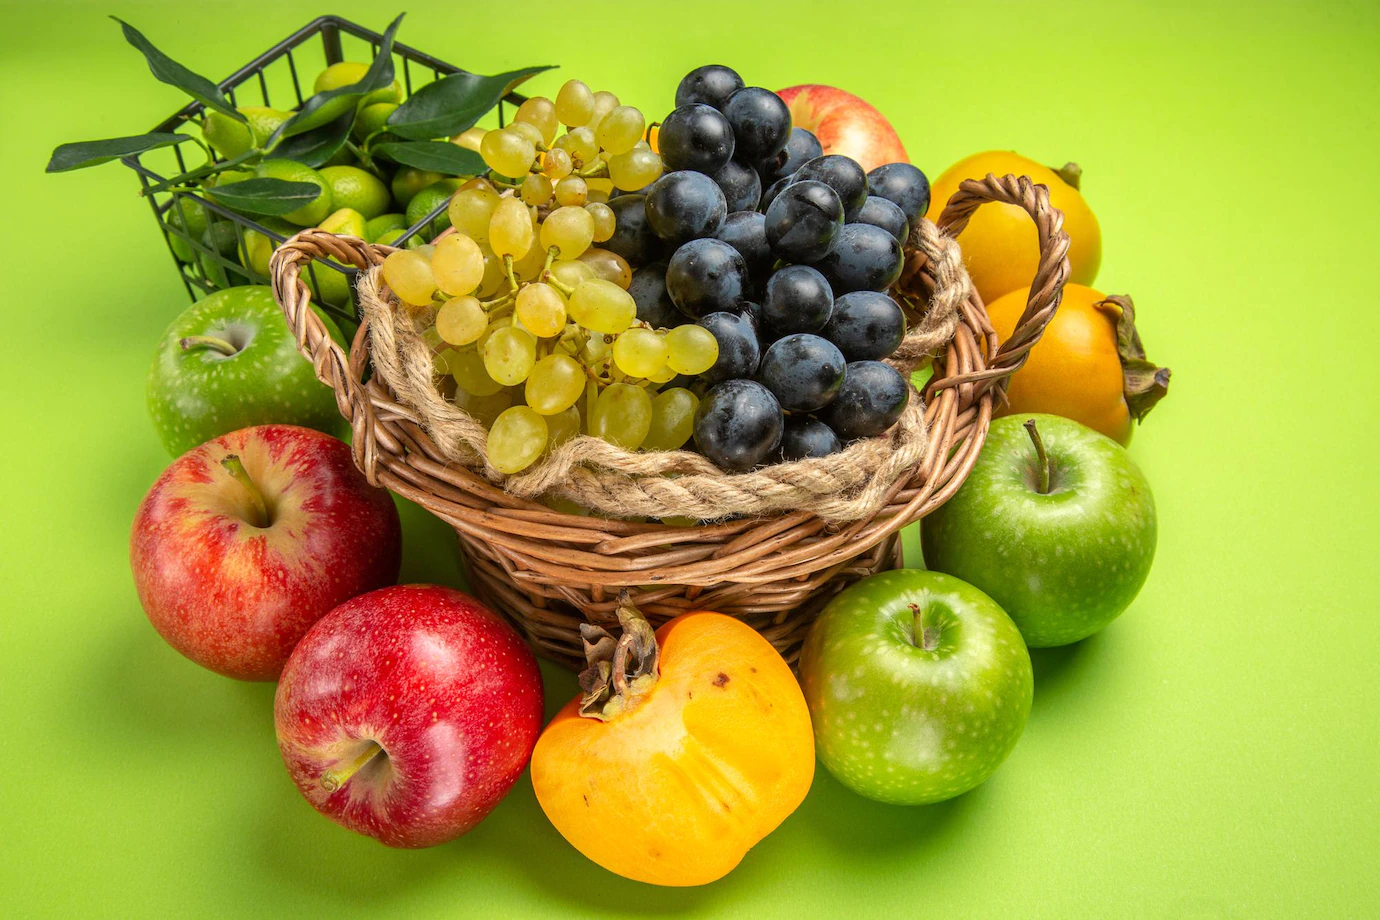 FRUITS RICH IN ANTIOXIDANTS THAT ARE GOOD FOR THE BODY